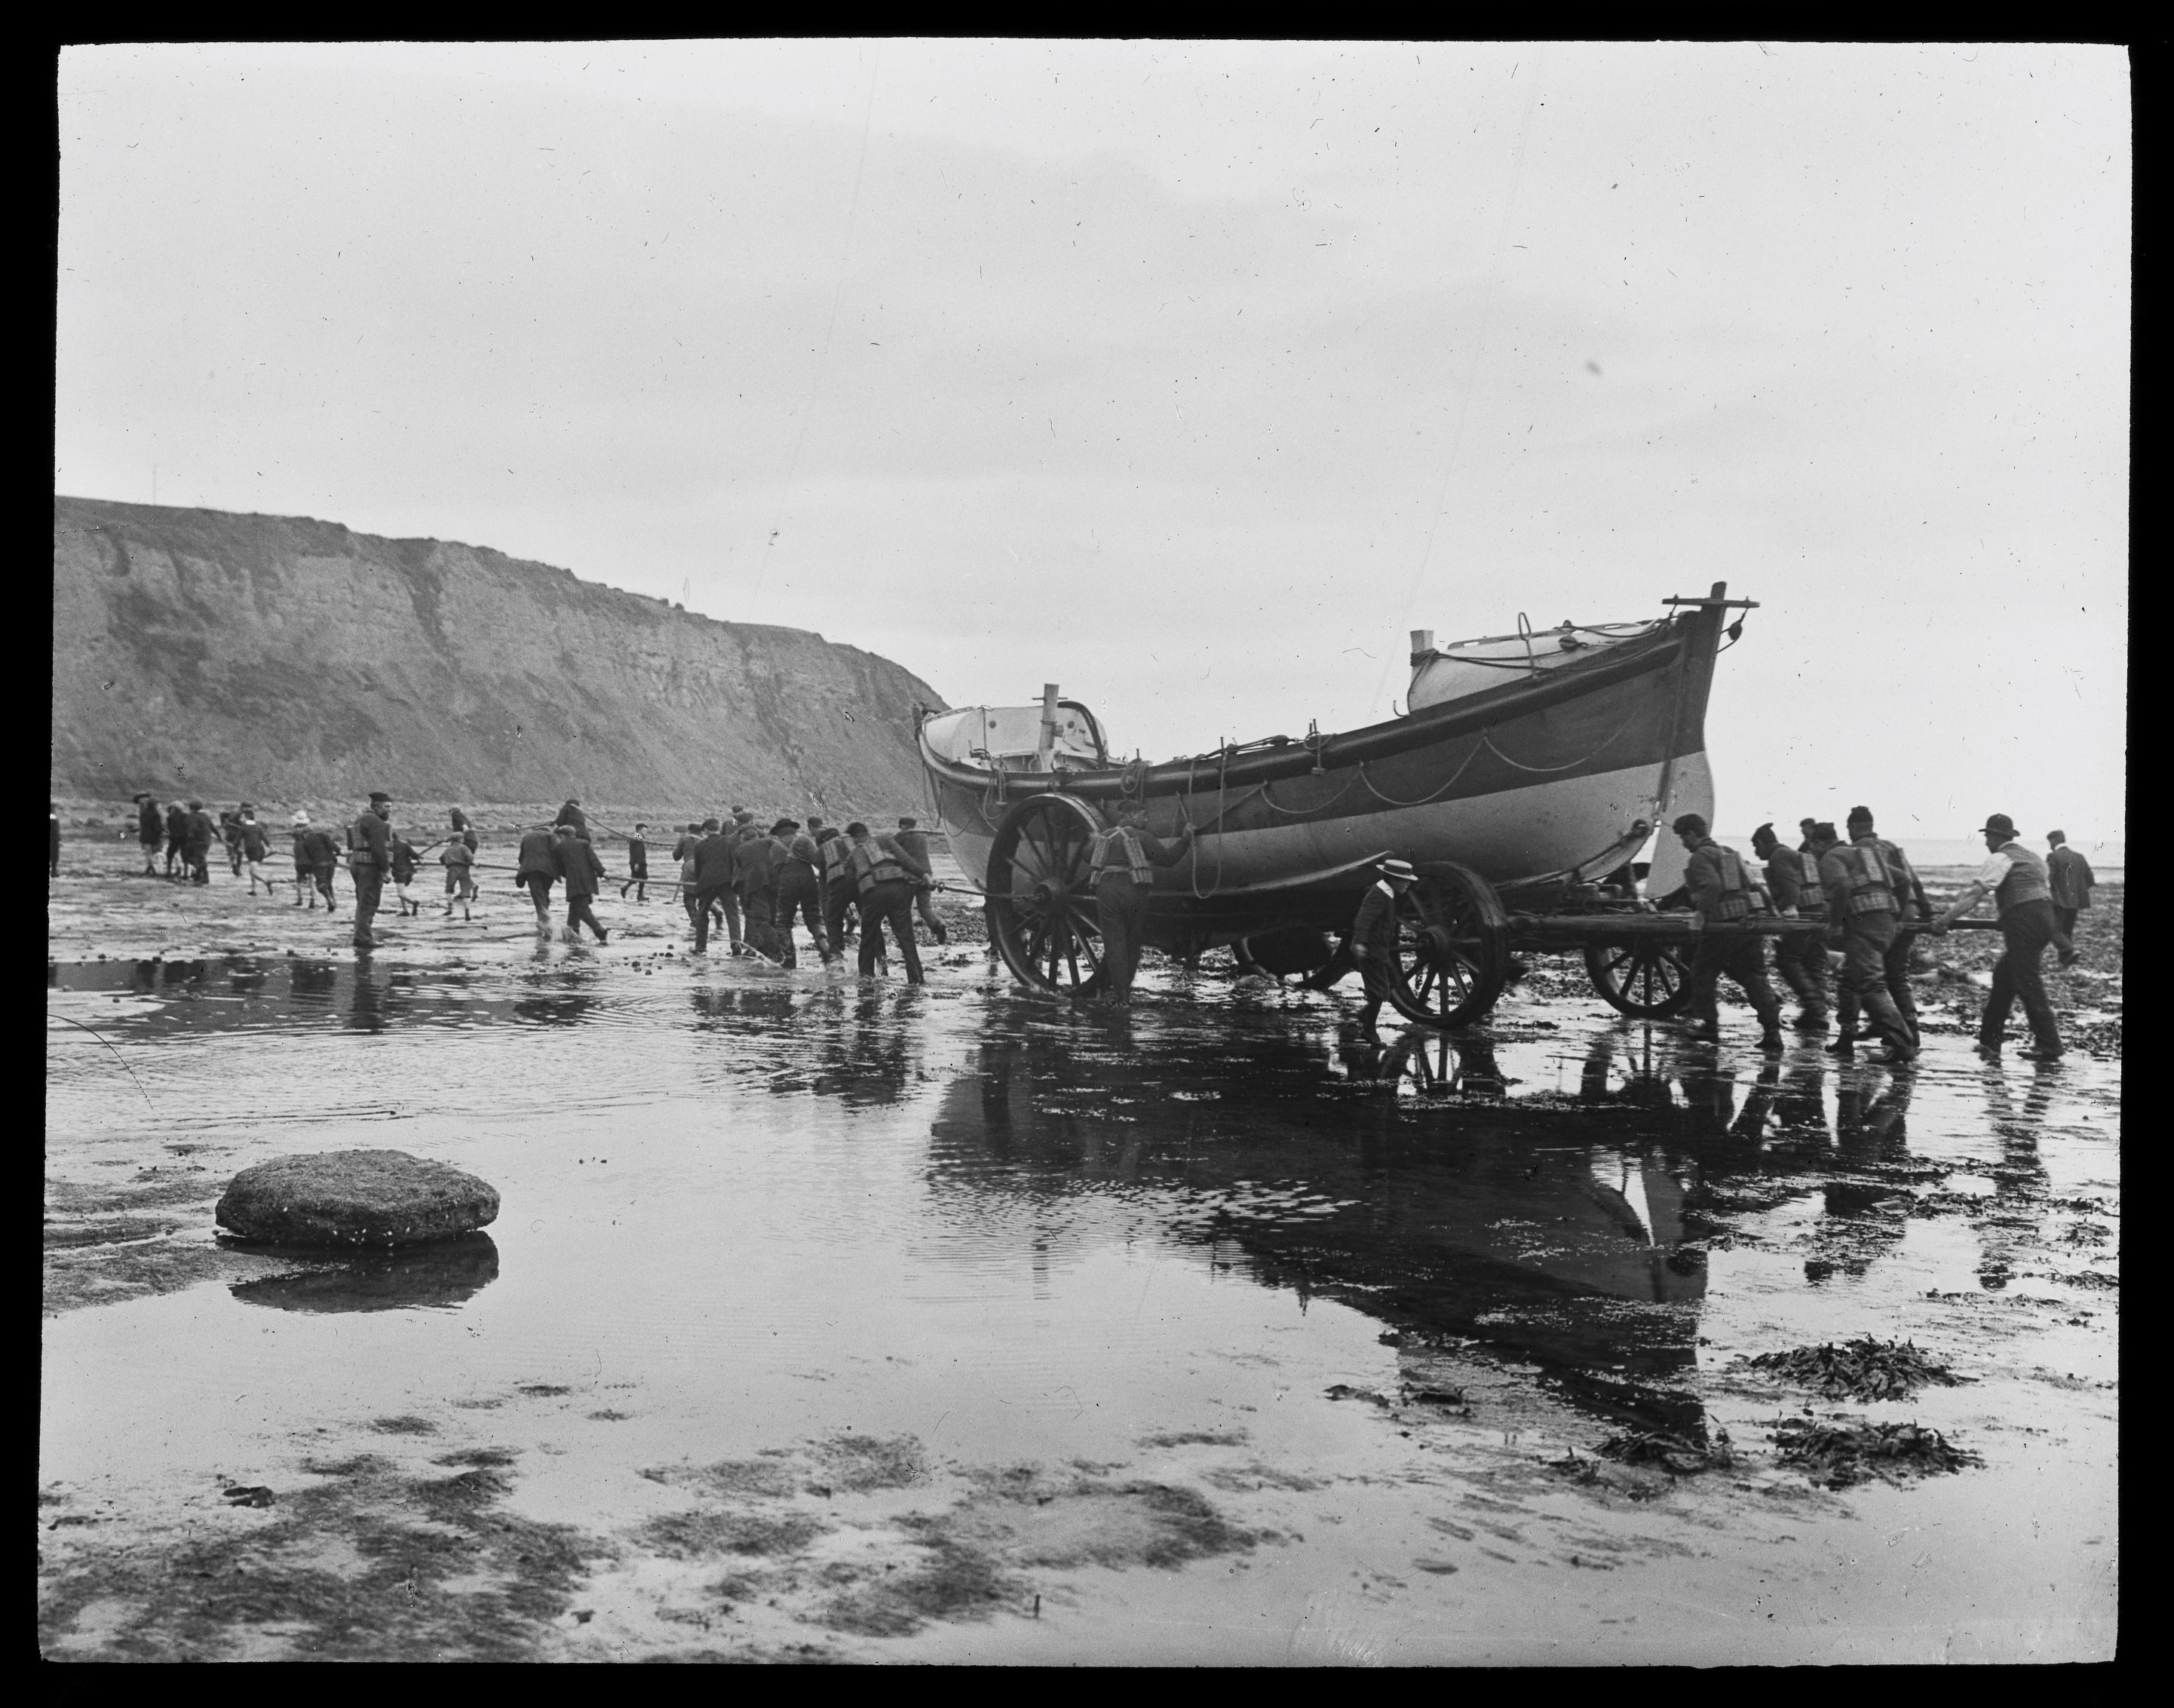 Lifeboatmen launching at Robin Hood’s Bay (no date), by Graystone bird, in the Tour of Yorkshire collection.